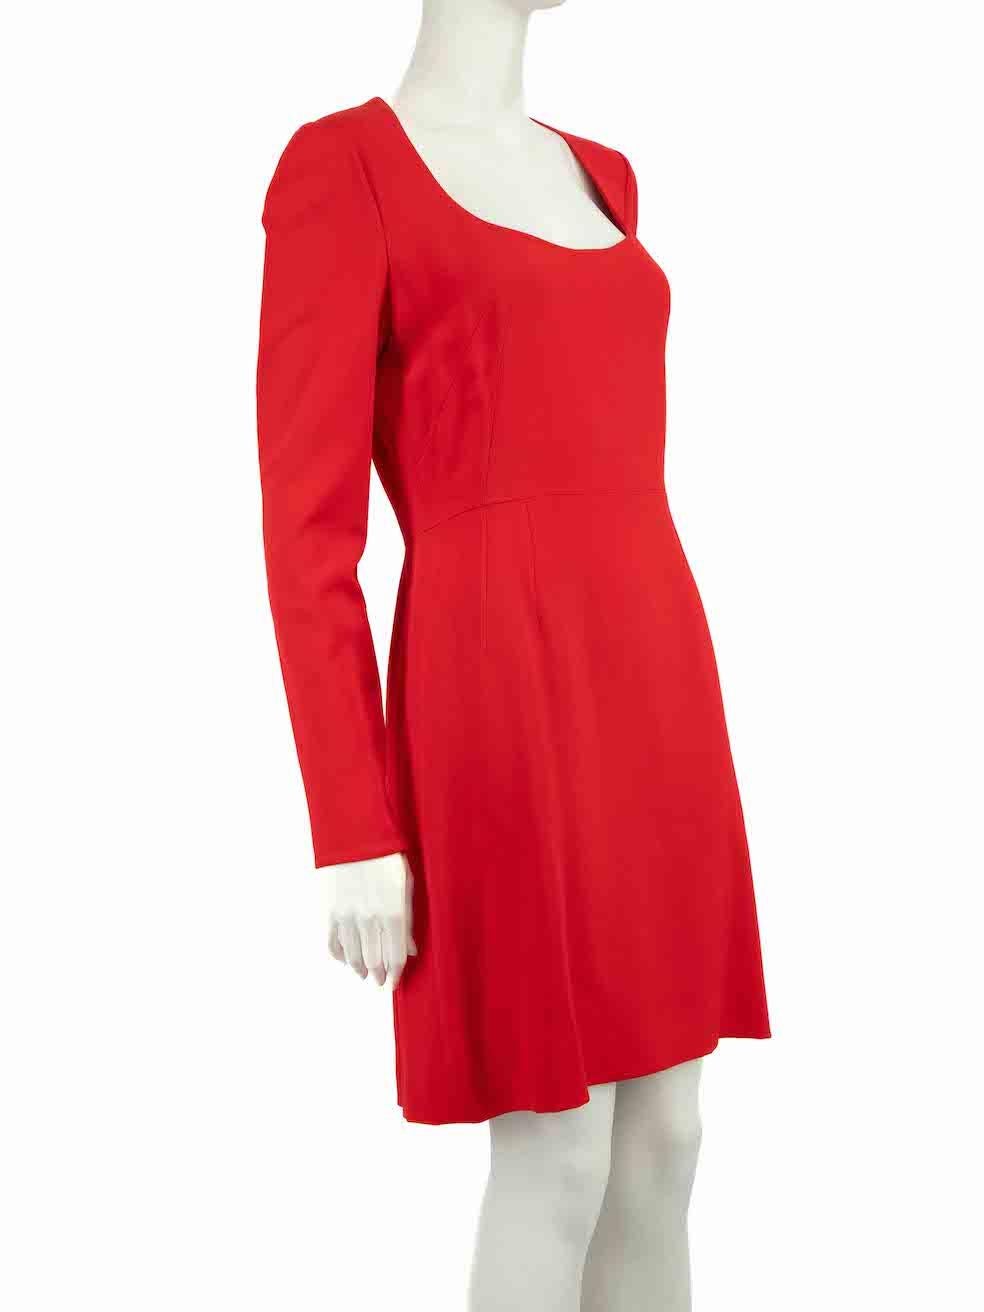 CONDITION is Never worn, with tags. No visible wear to dress is evident beyond a couple of very small plucks to the weave seen at the waistline on this new Dolce & Gabbana designer resale item.
 
 
 
 Details
 
 
 Red
 
 Viscose
 
 Dress
 
 Round